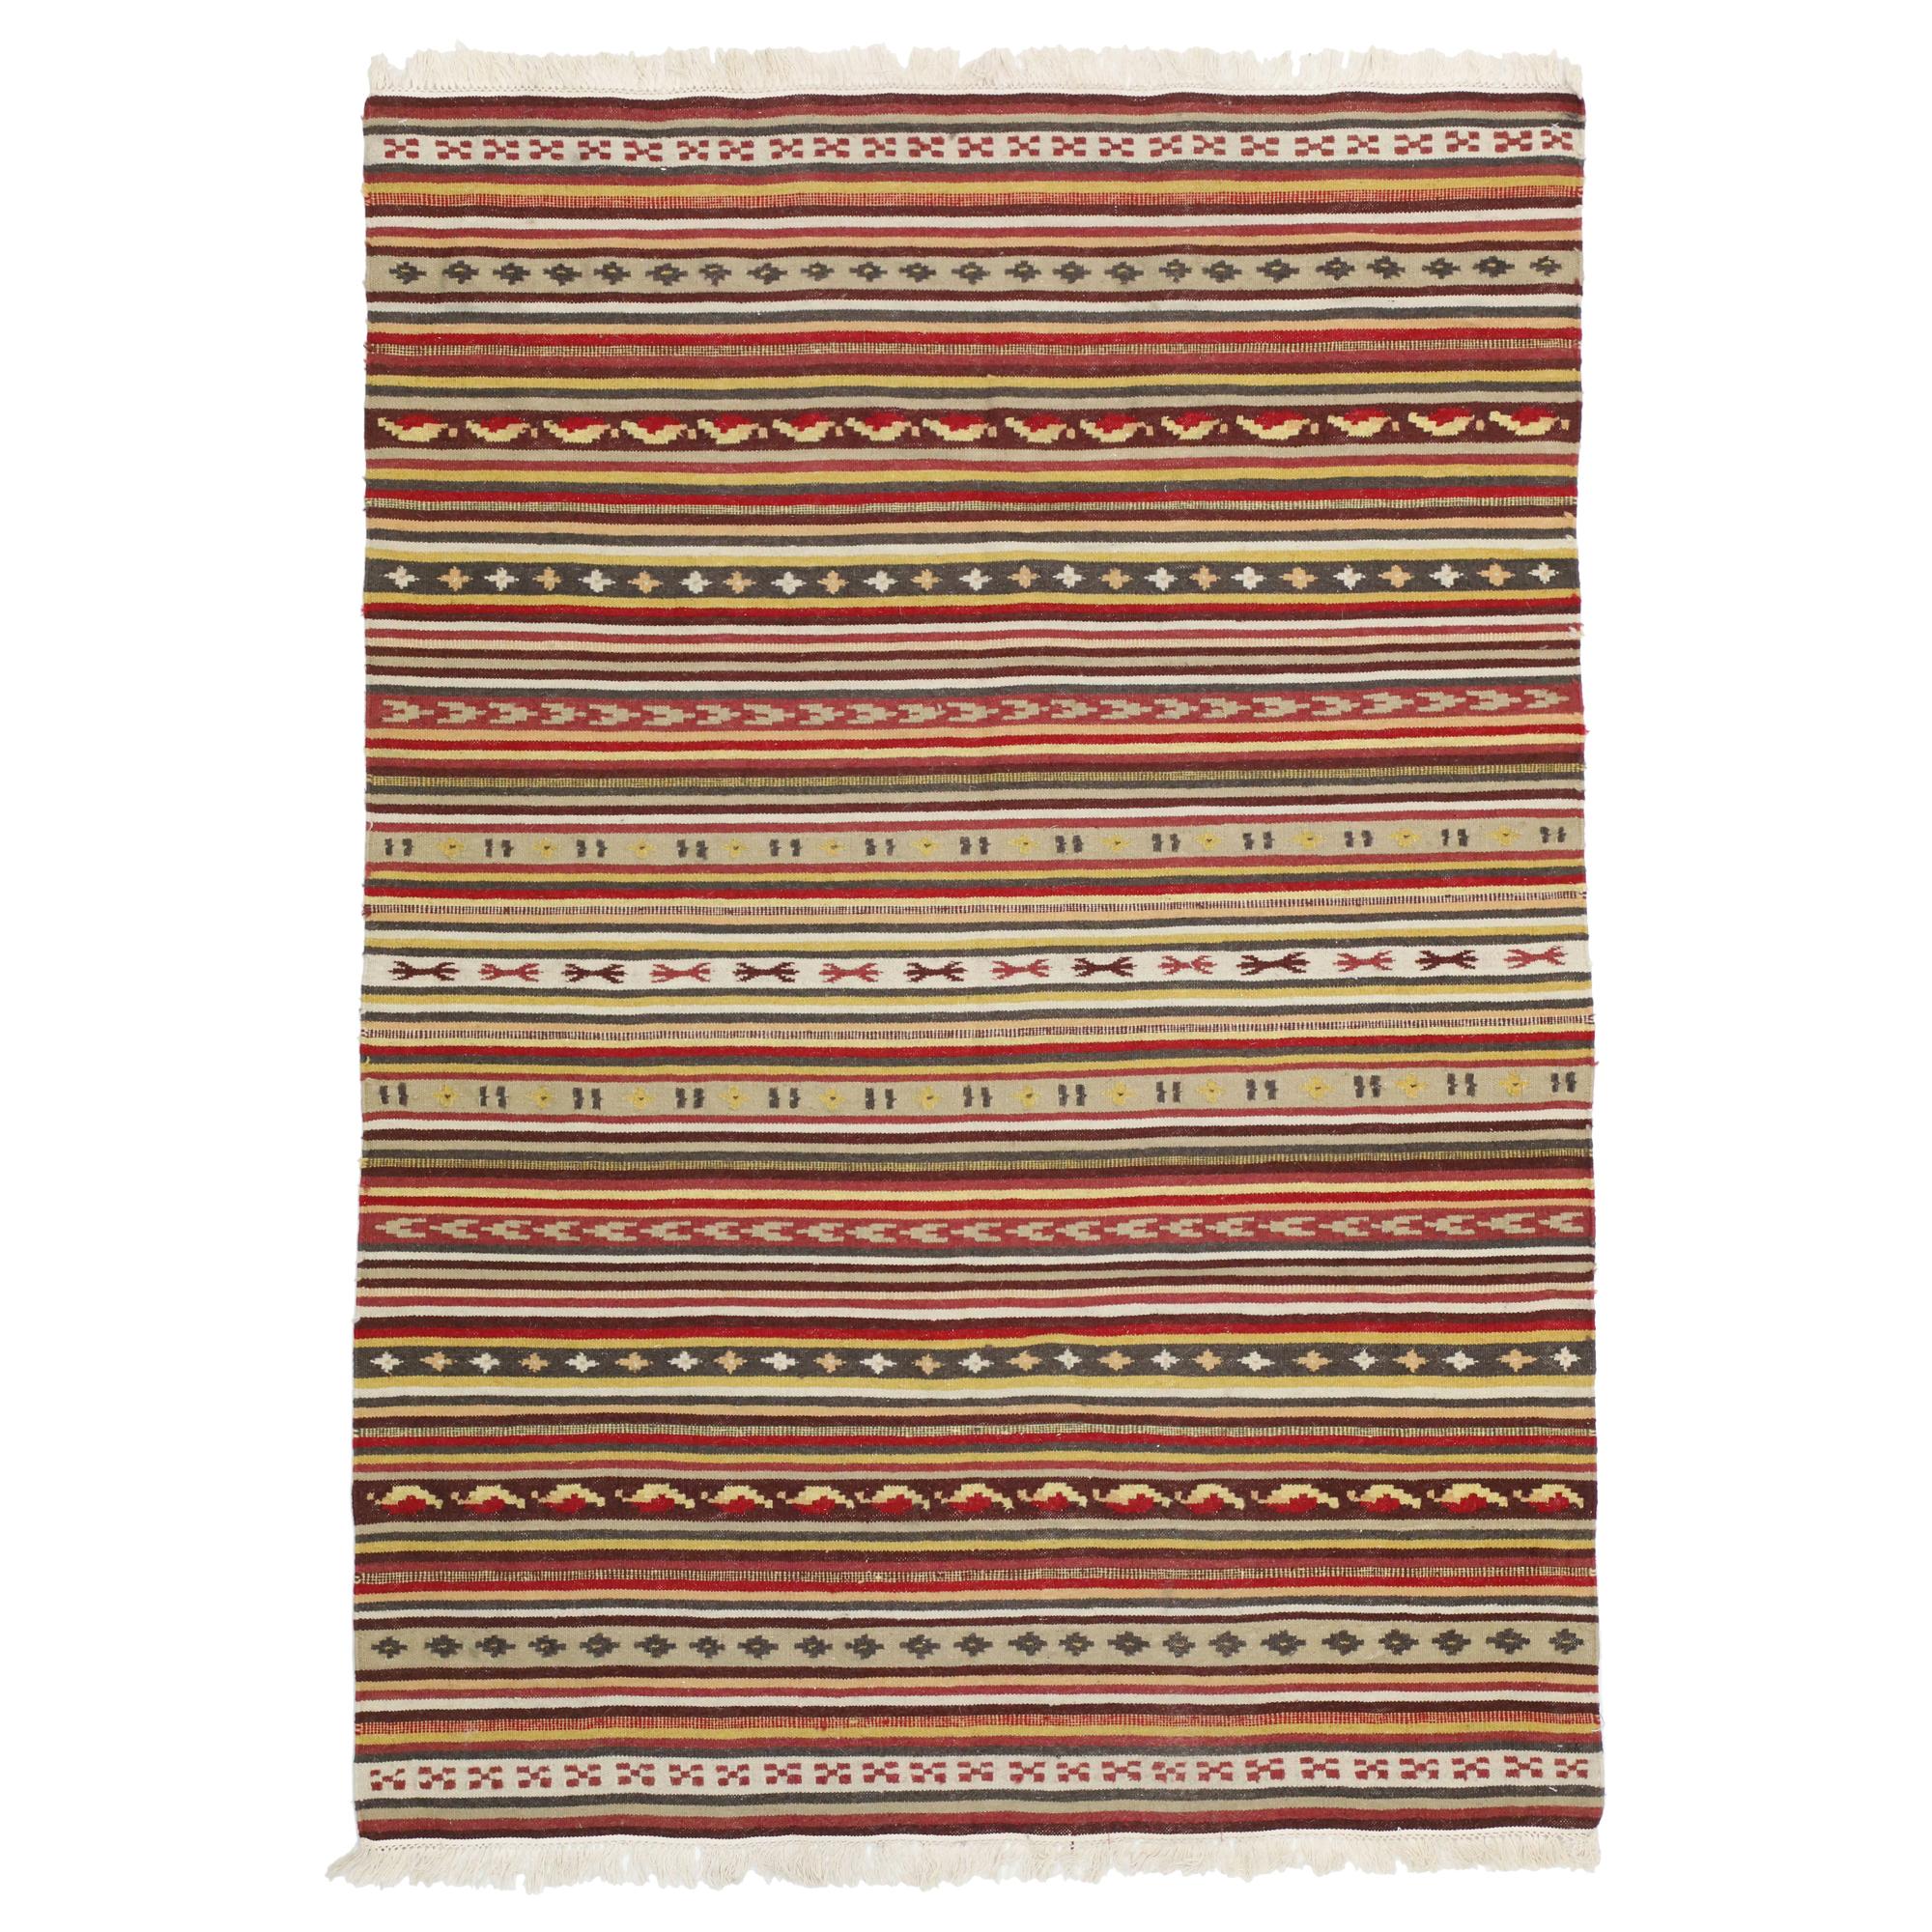 Vintage Turkish Striped Kilim Rug with Tribal Style, Flat-Weave Rug with Stripes For Sale